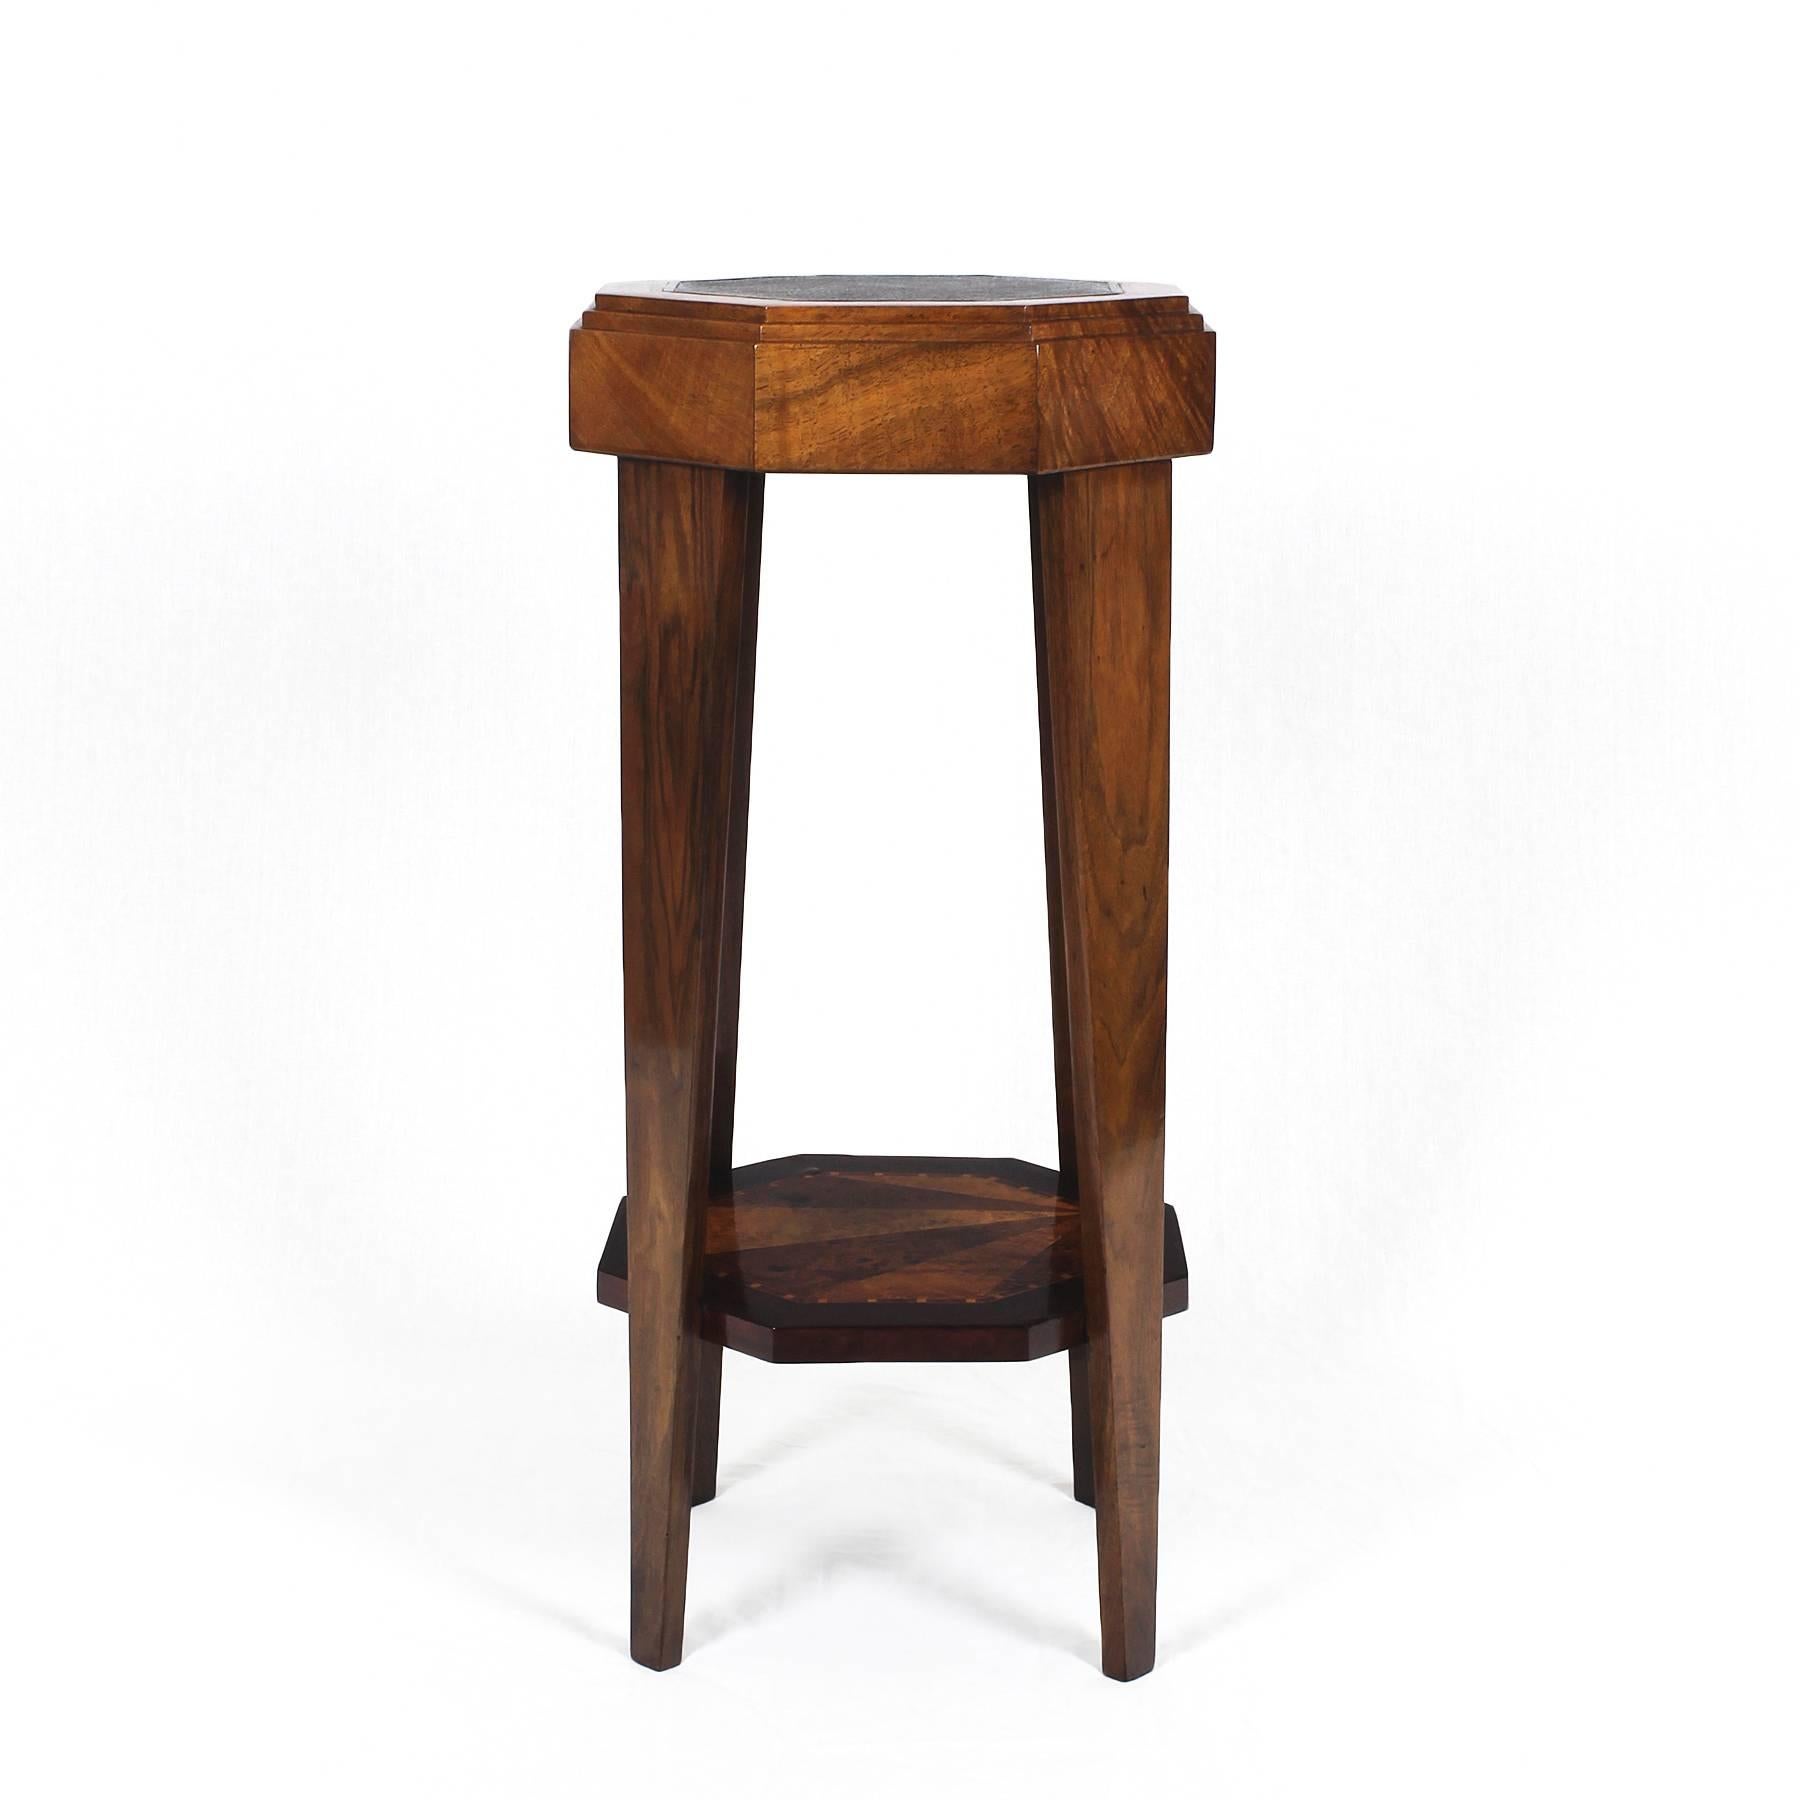 Ravishing Art Deco stand, solid walnut and lemon tree wood, mahogany, rosewood and bird’s-eye maple marquetry, French polish. Original leather on top,

France, 1925.